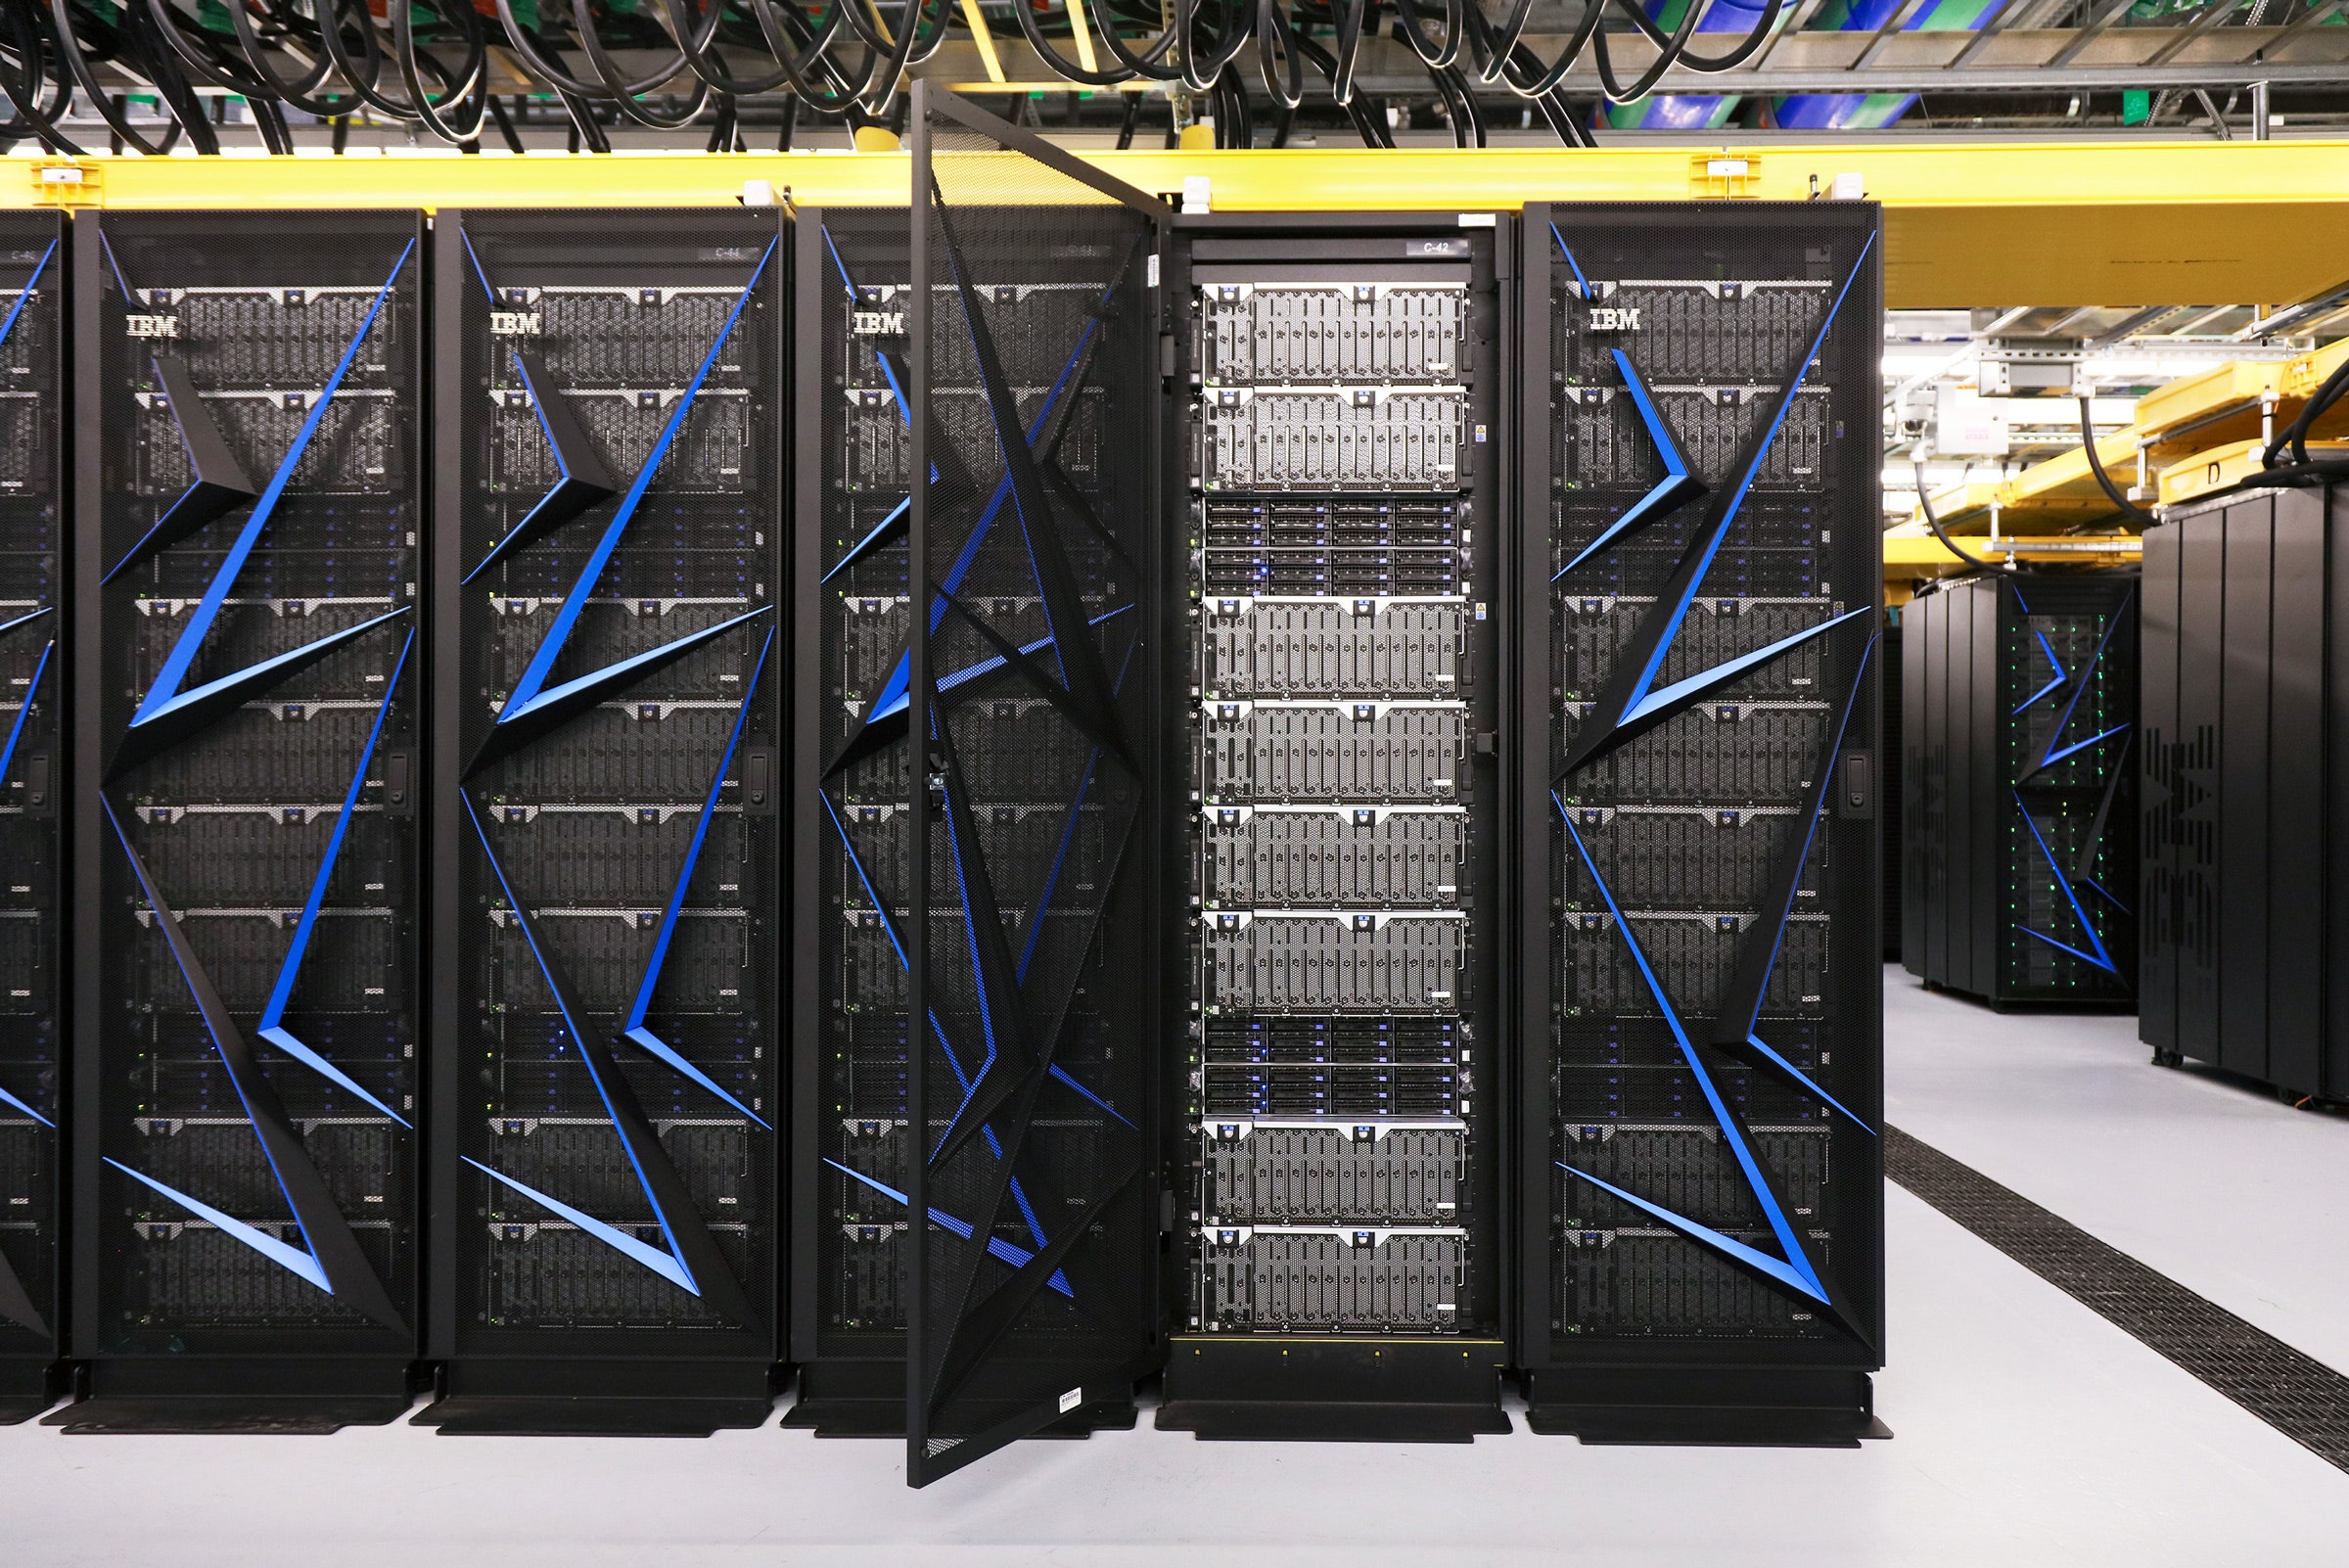 This new supercomputer is now the worlds fastest brainmimicking machine